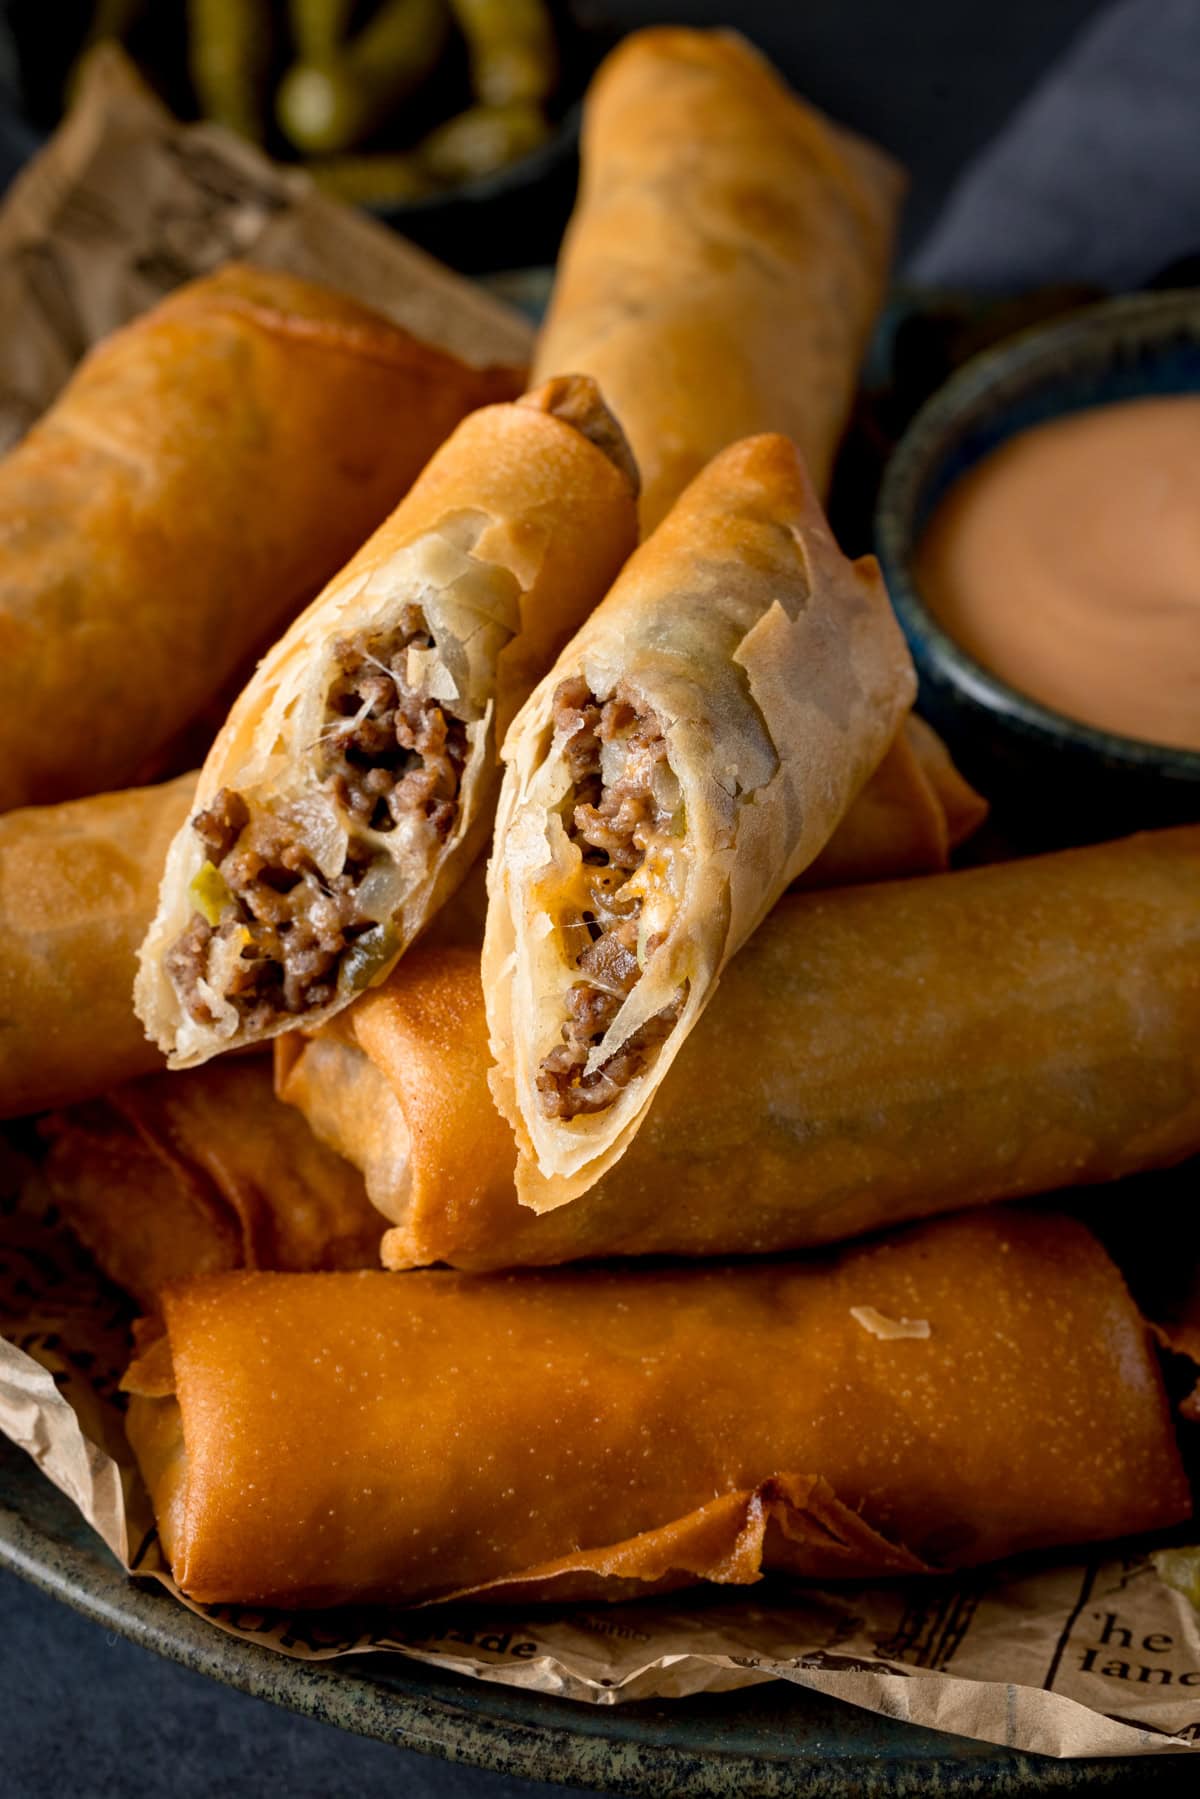 A tall shot of Cheeseburger Spring Rolls. There are 6 whole spring rolls stacked horizontally next to each other, and on top of the stack (in the middle of the image) there is another spring roll that has been cut in half and the two halves are arranged next to each other so you can see the filling. This is set on a wooden board. In the right of the background, you can see a dark blue dish filled with burger sauce. And in the top left of the background, you can slightly see another blue dish with pickled gherkins in it. This is all set on a navy blue background.